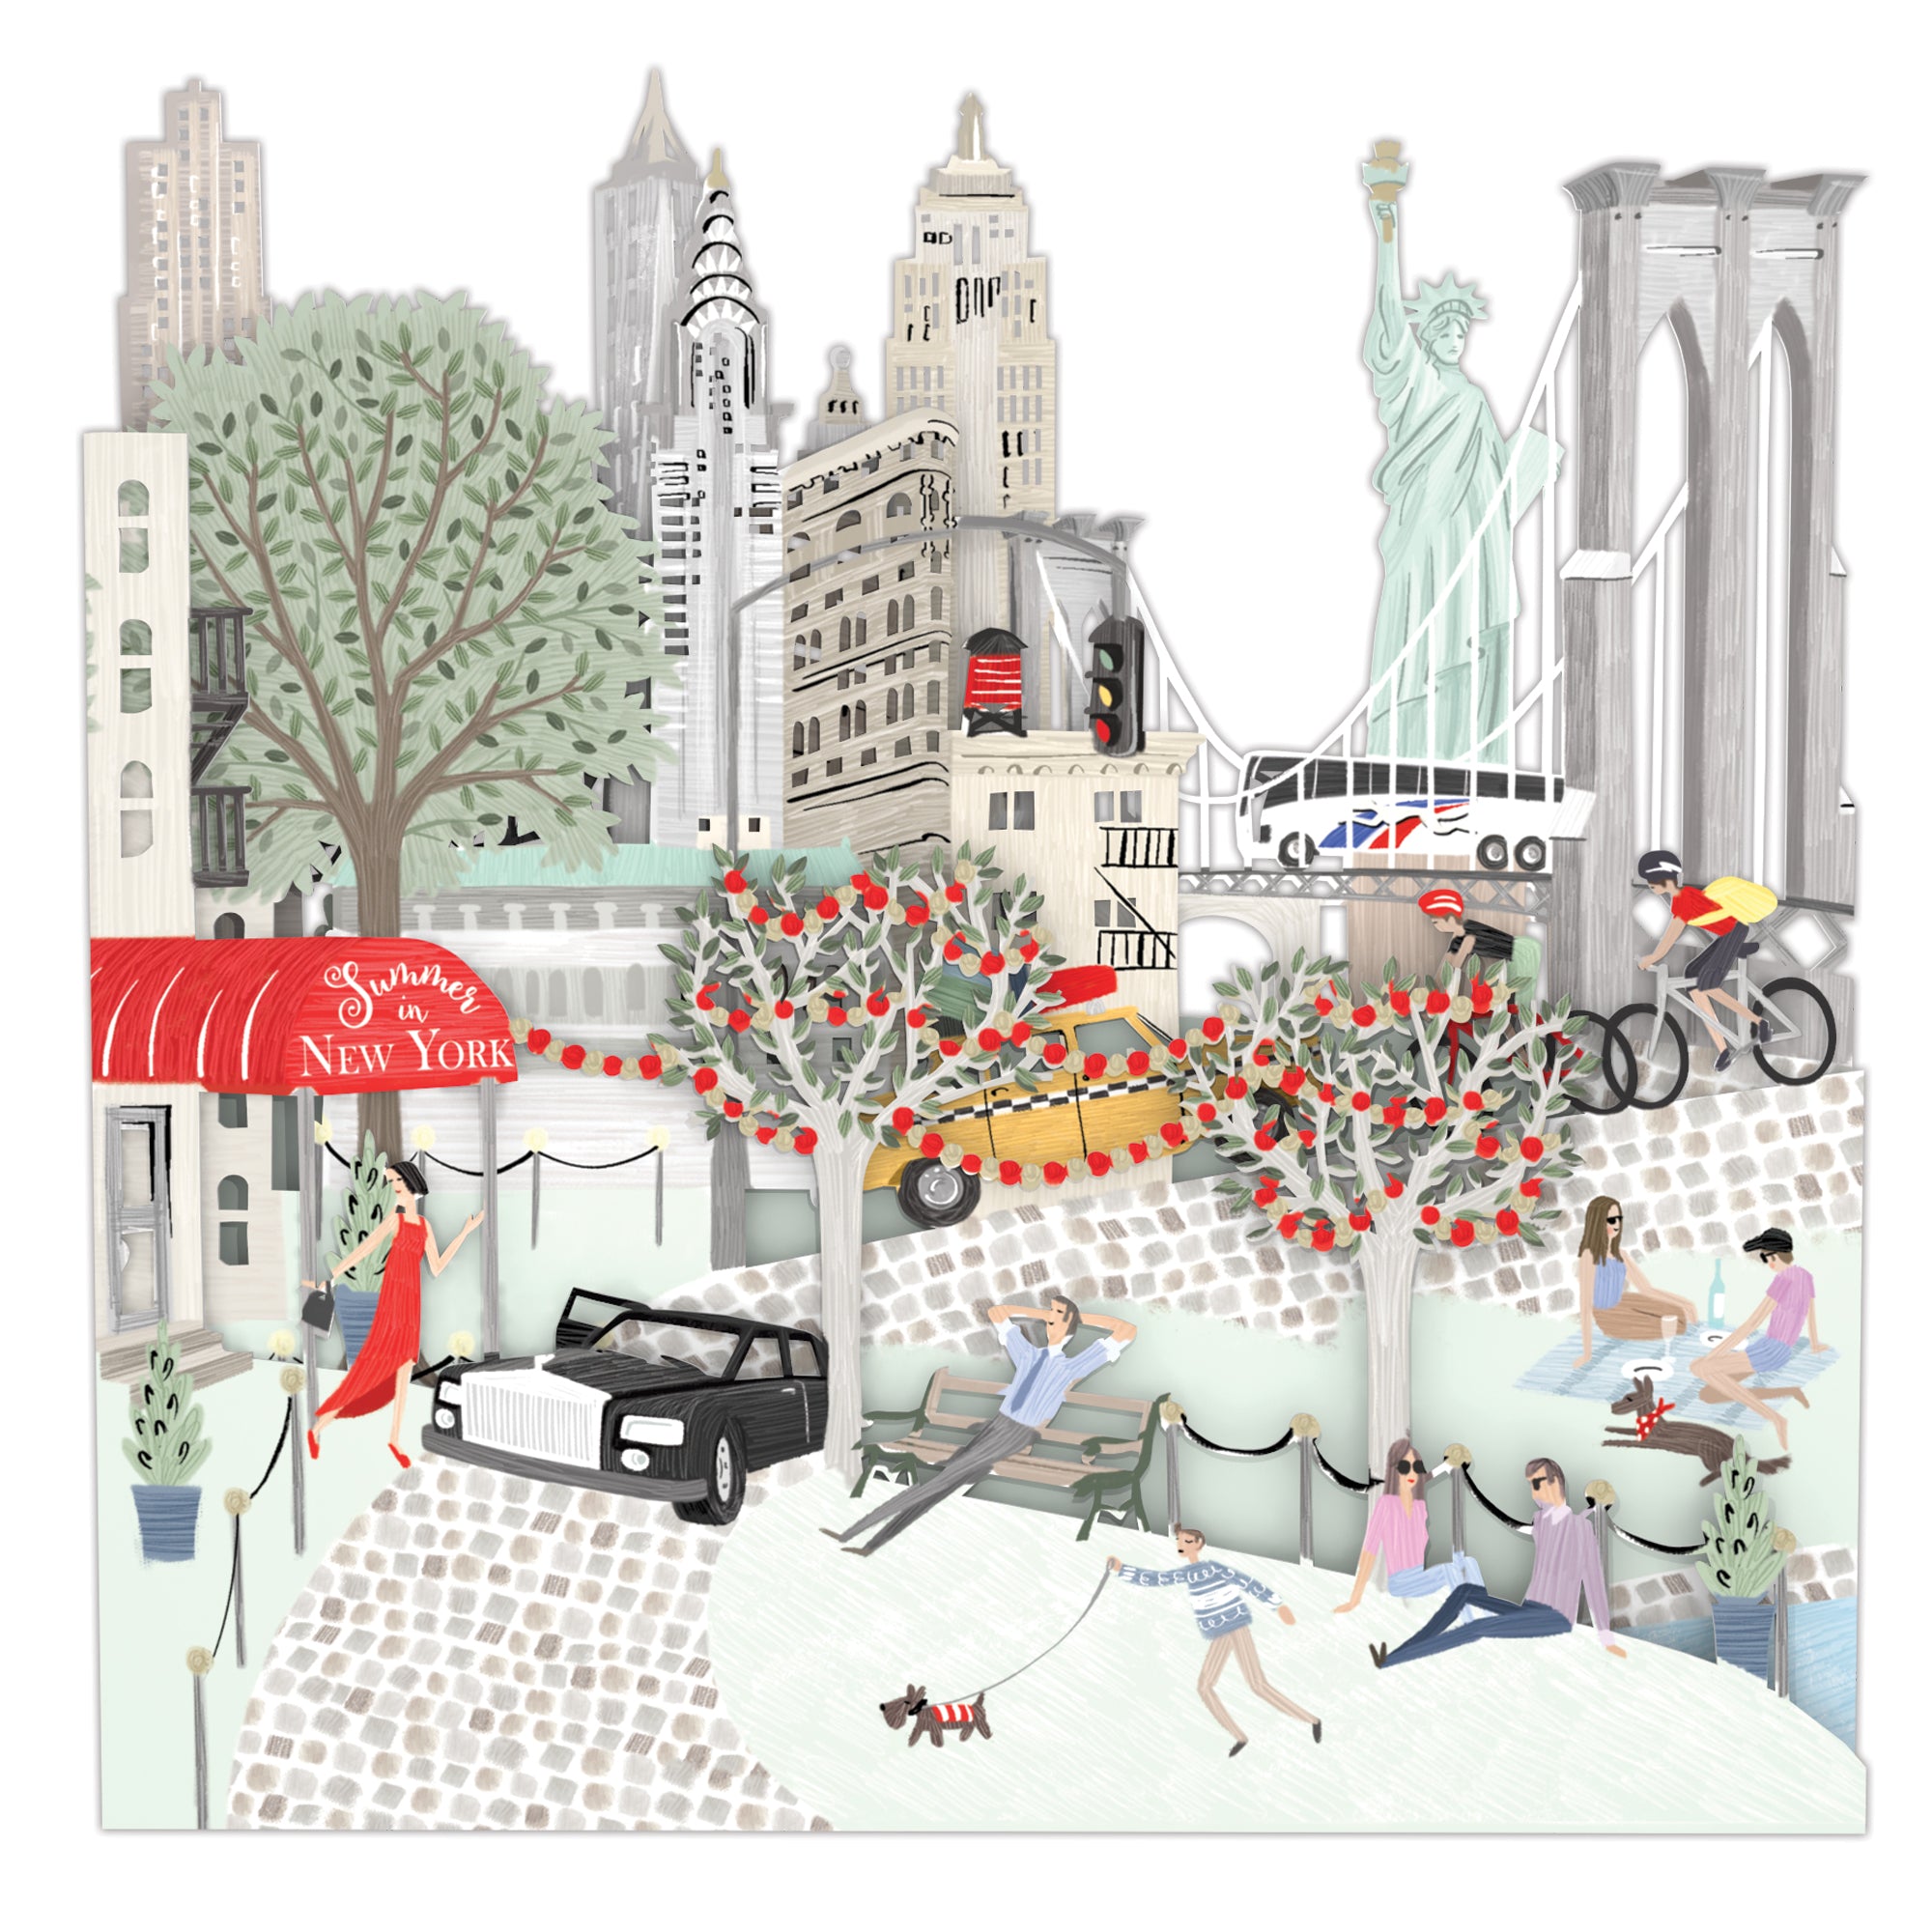 &quot;New York&quot; - Zig-Zag Greetings Card